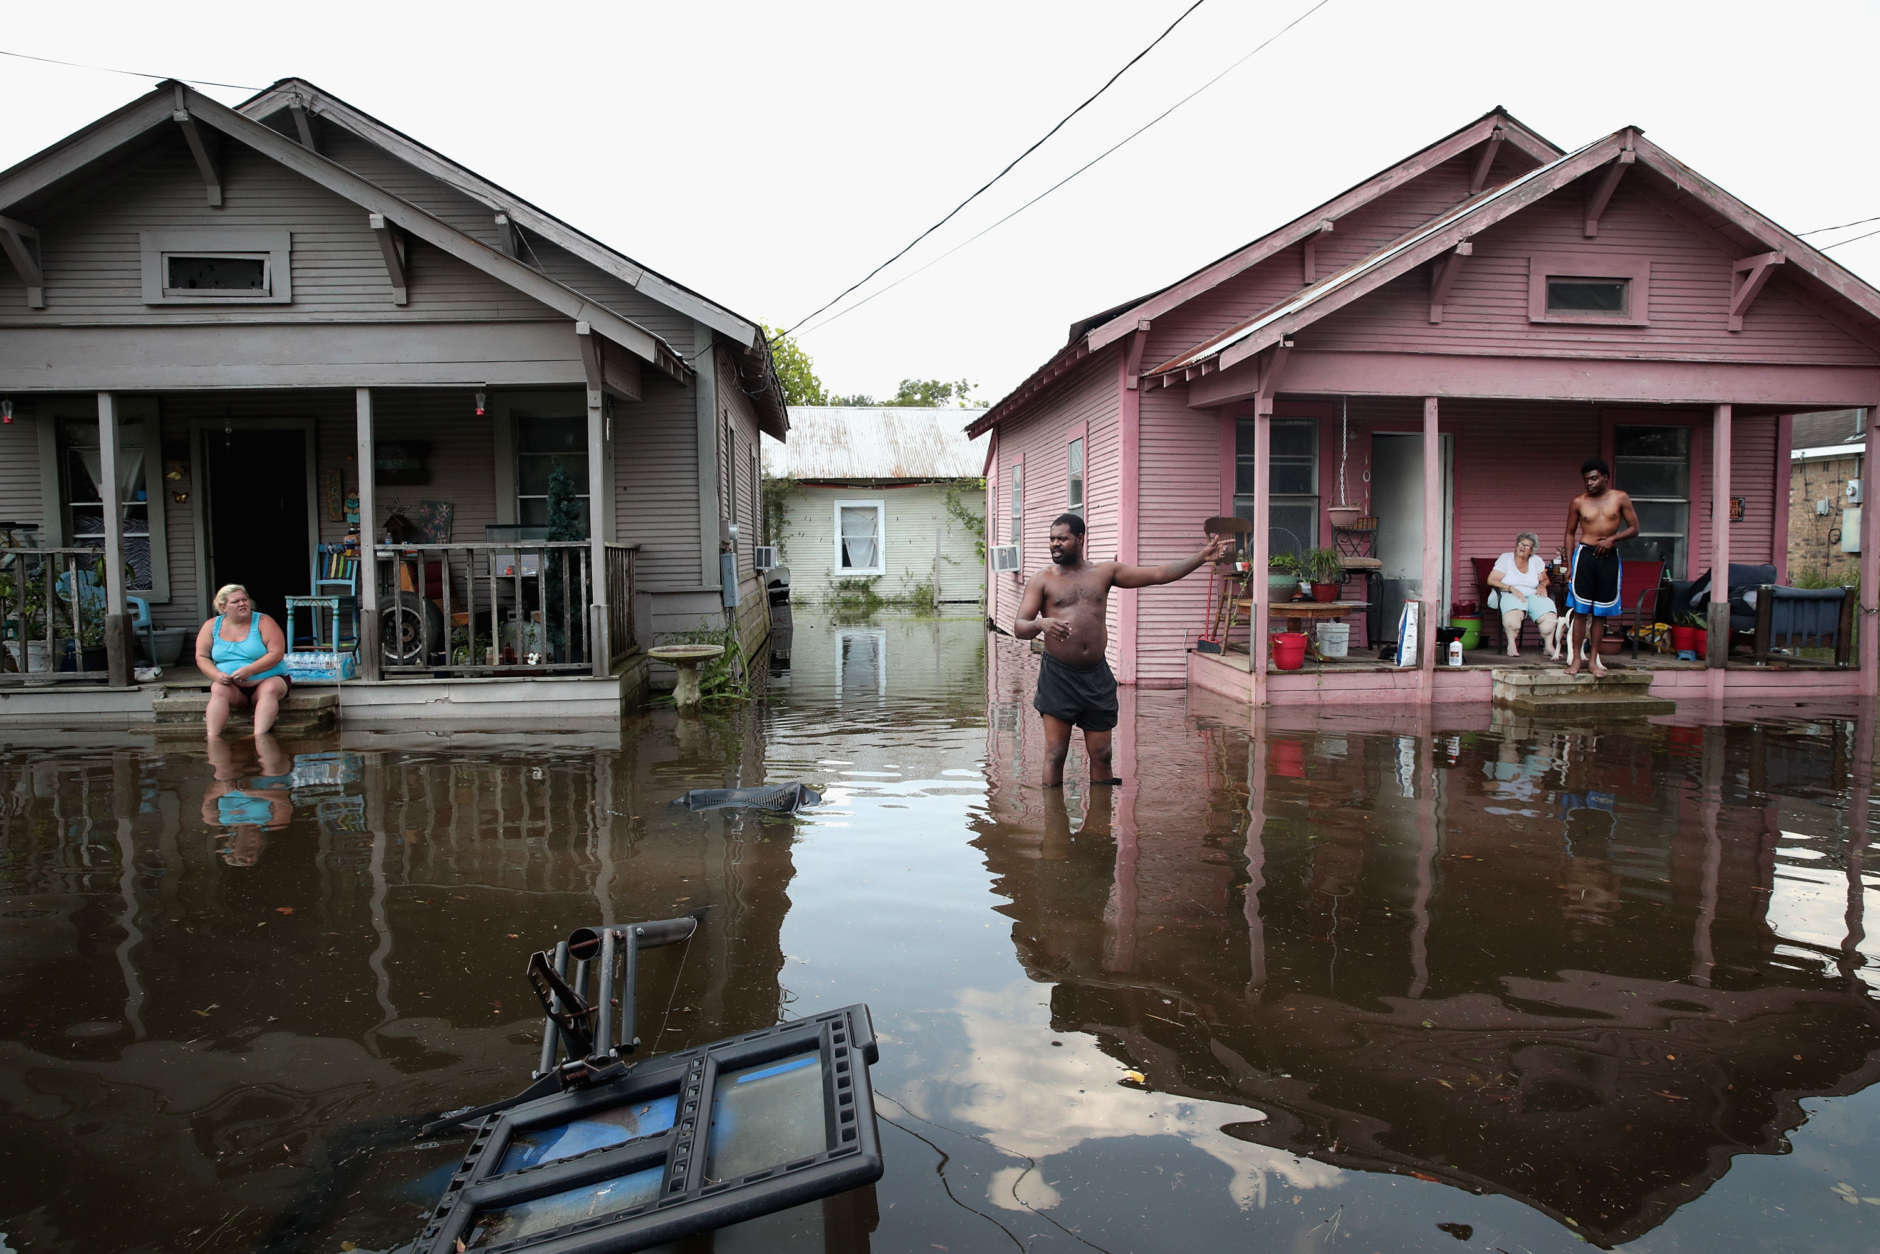 ORANGE, TX - SEPTEMBER 02:  Residents hang out in front of their homes which are surrounded by floodwater after torrential rains pounded Southeast Texas following Hurricane and Tropical Storm Harvey causing widespread flooding on September 2, 2017 in Orange, Texas. Harvey, which made landfall north of Corpus Christi August 25, has dumped nearly 50 inches of rain in and around areas Houston.  (Photo by Scott Olson/Getty Images)